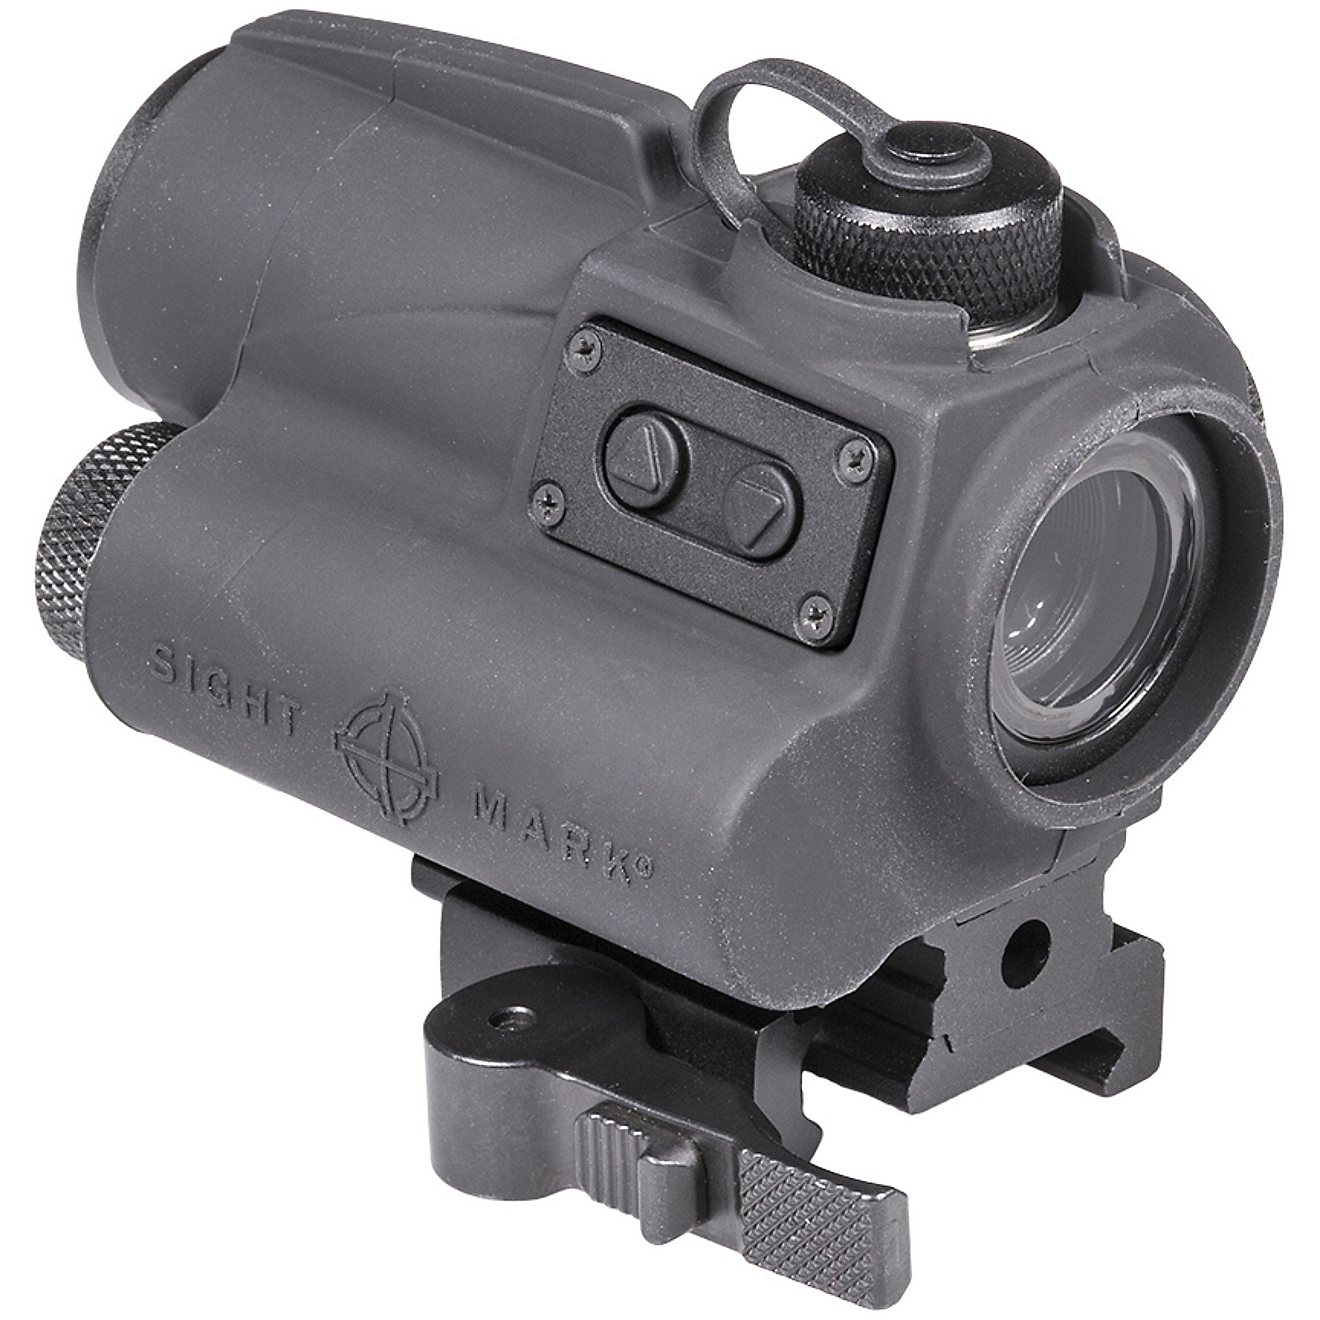 Sightmark Wolverine CSR Red Dot Sight                                                                                            - view number 3